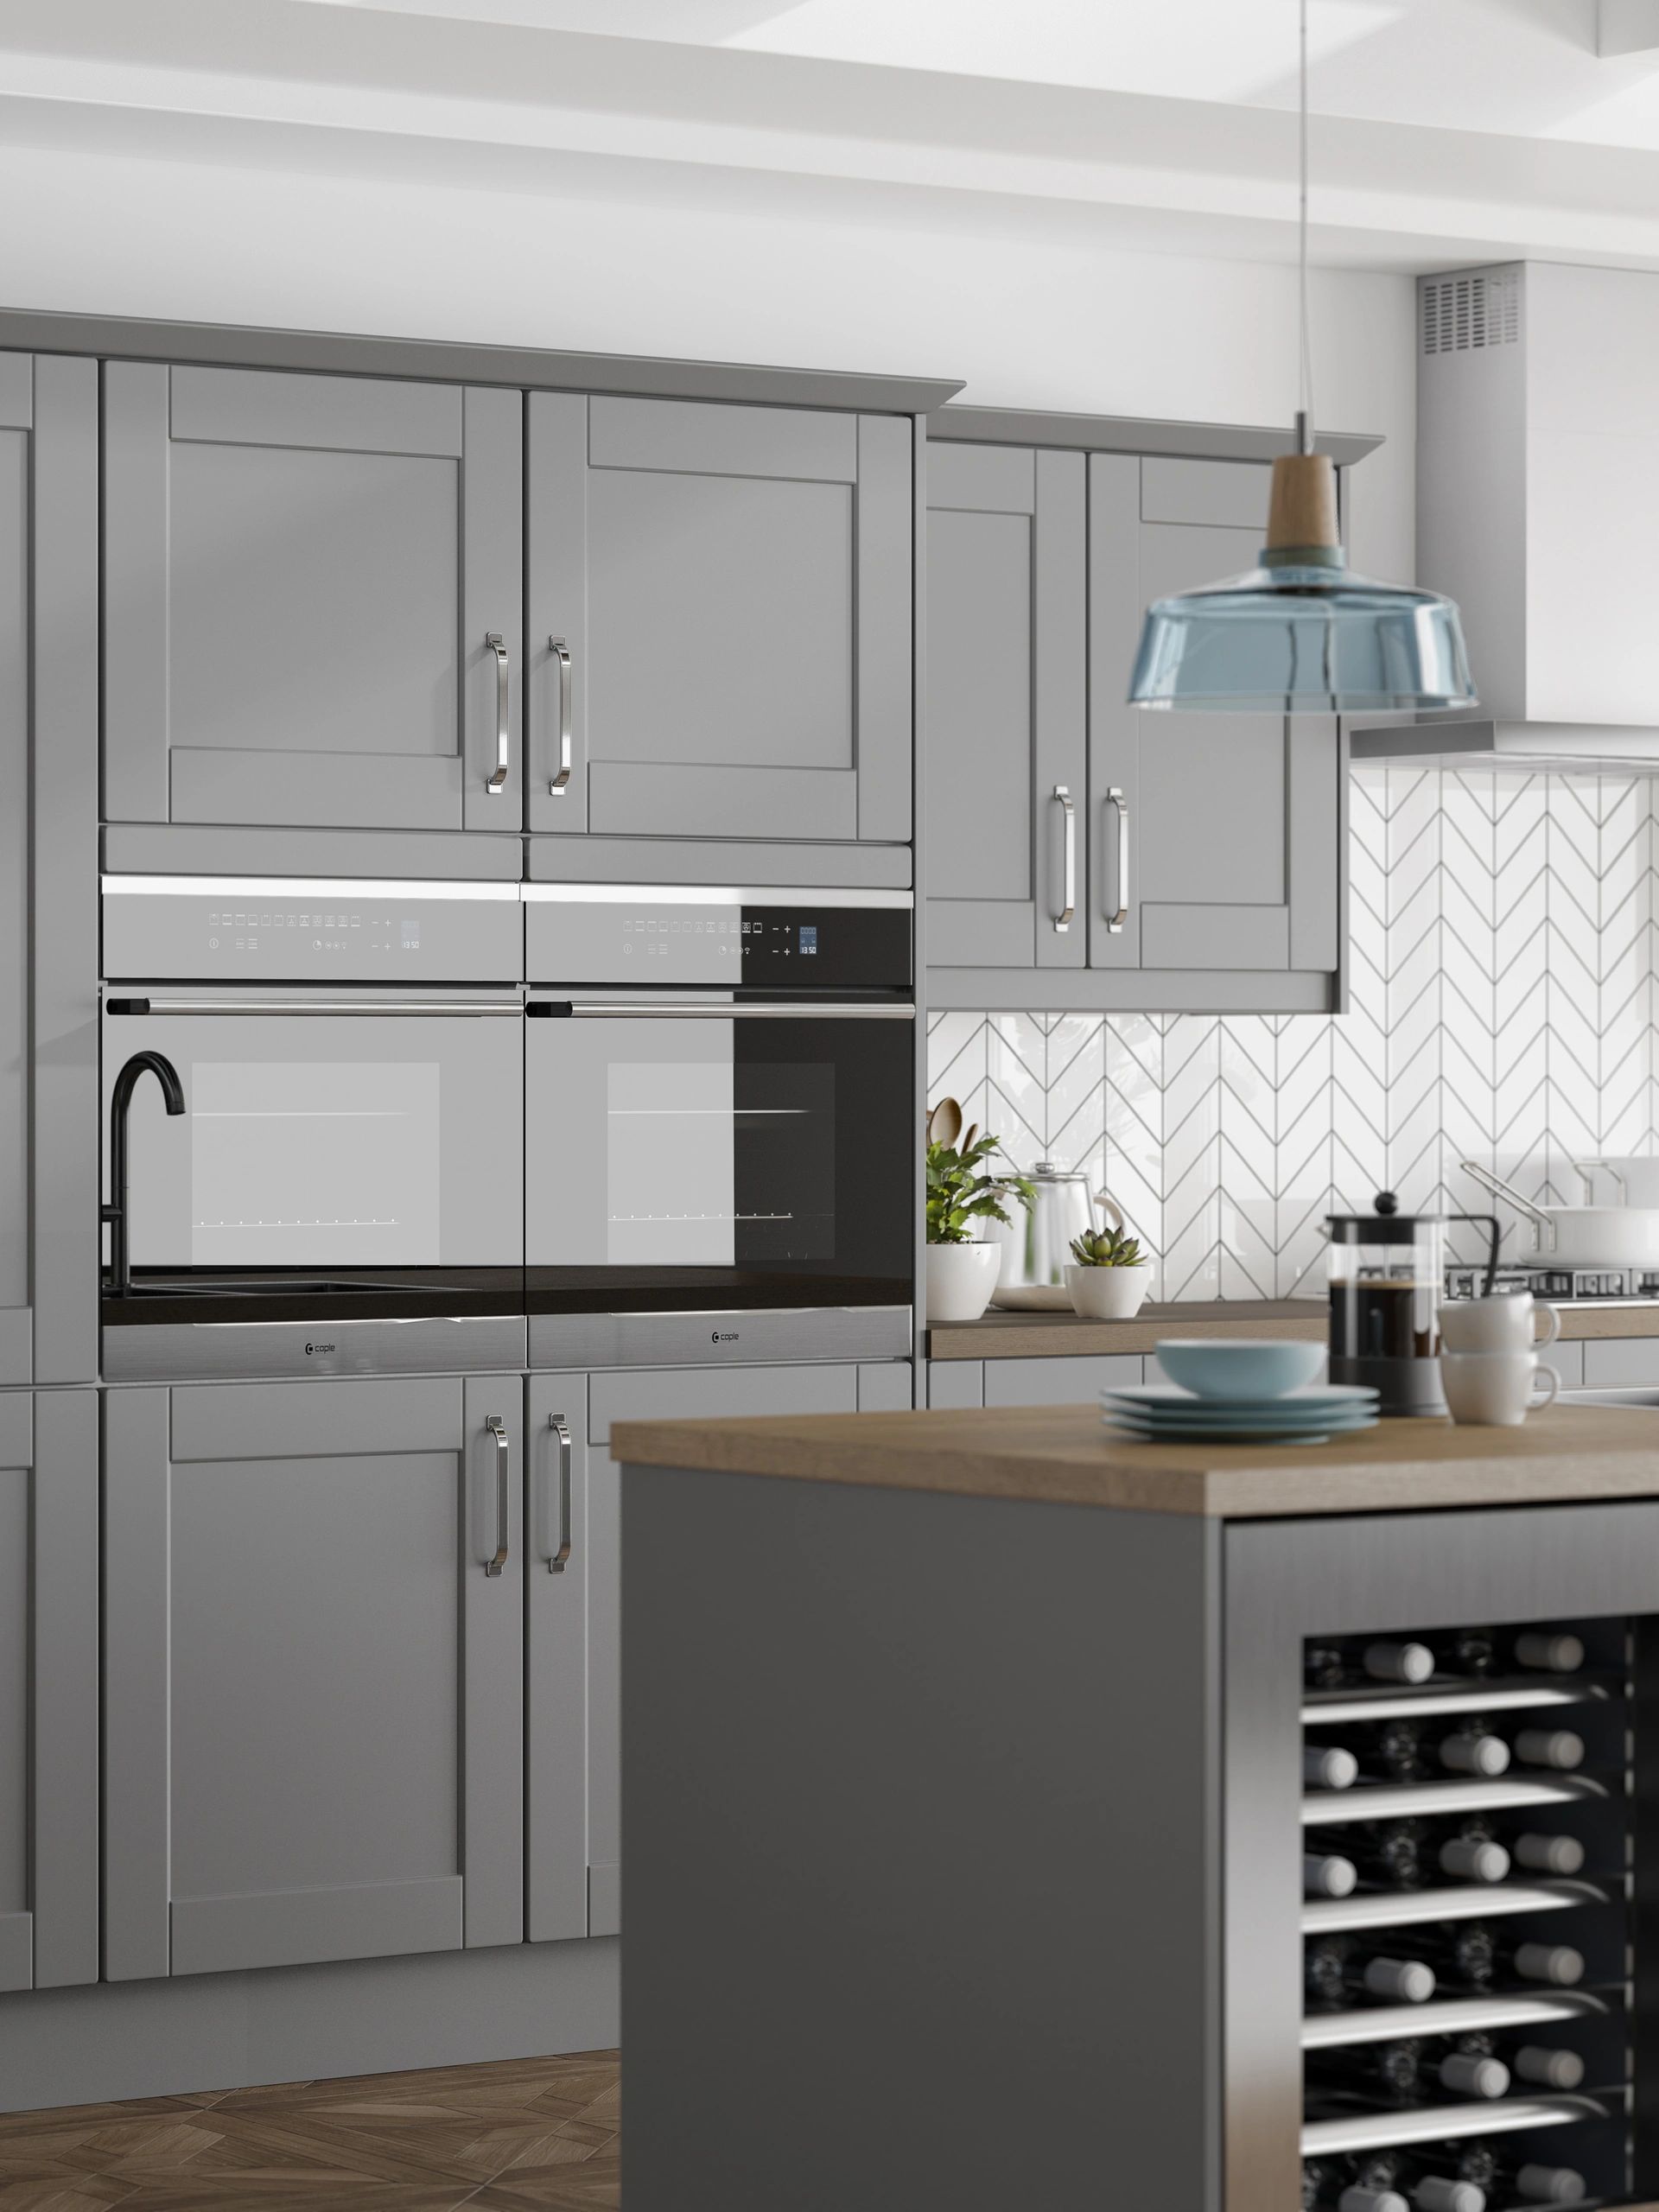 Grey 1 piece traditional Shaker kitchen with oak worktops, double oven and wine fridge